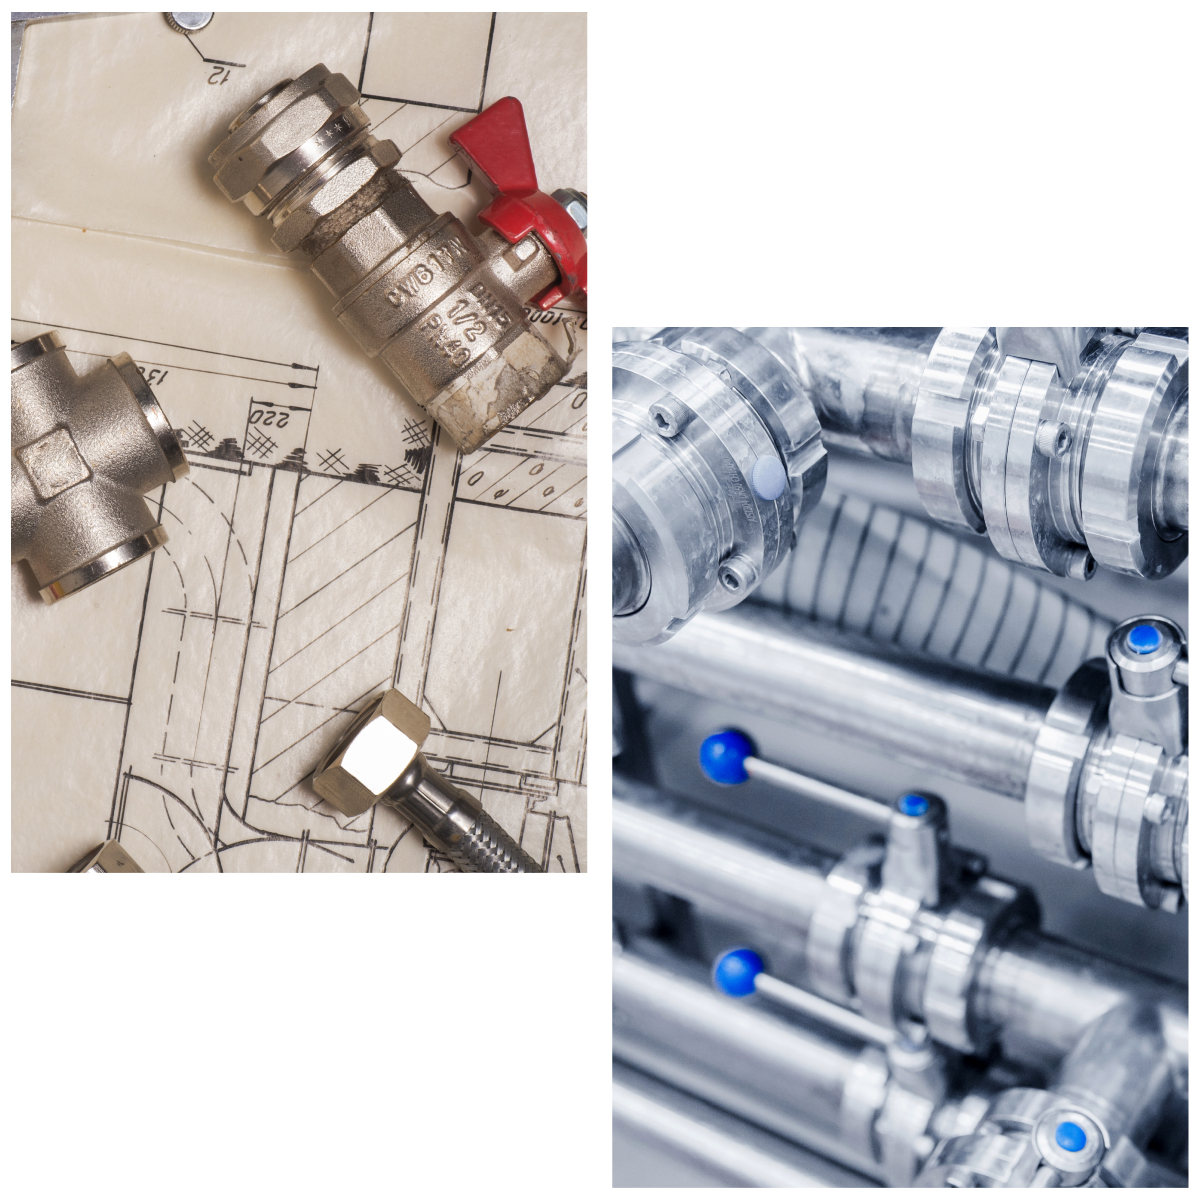 A collage image of industrial valves and valve parts.